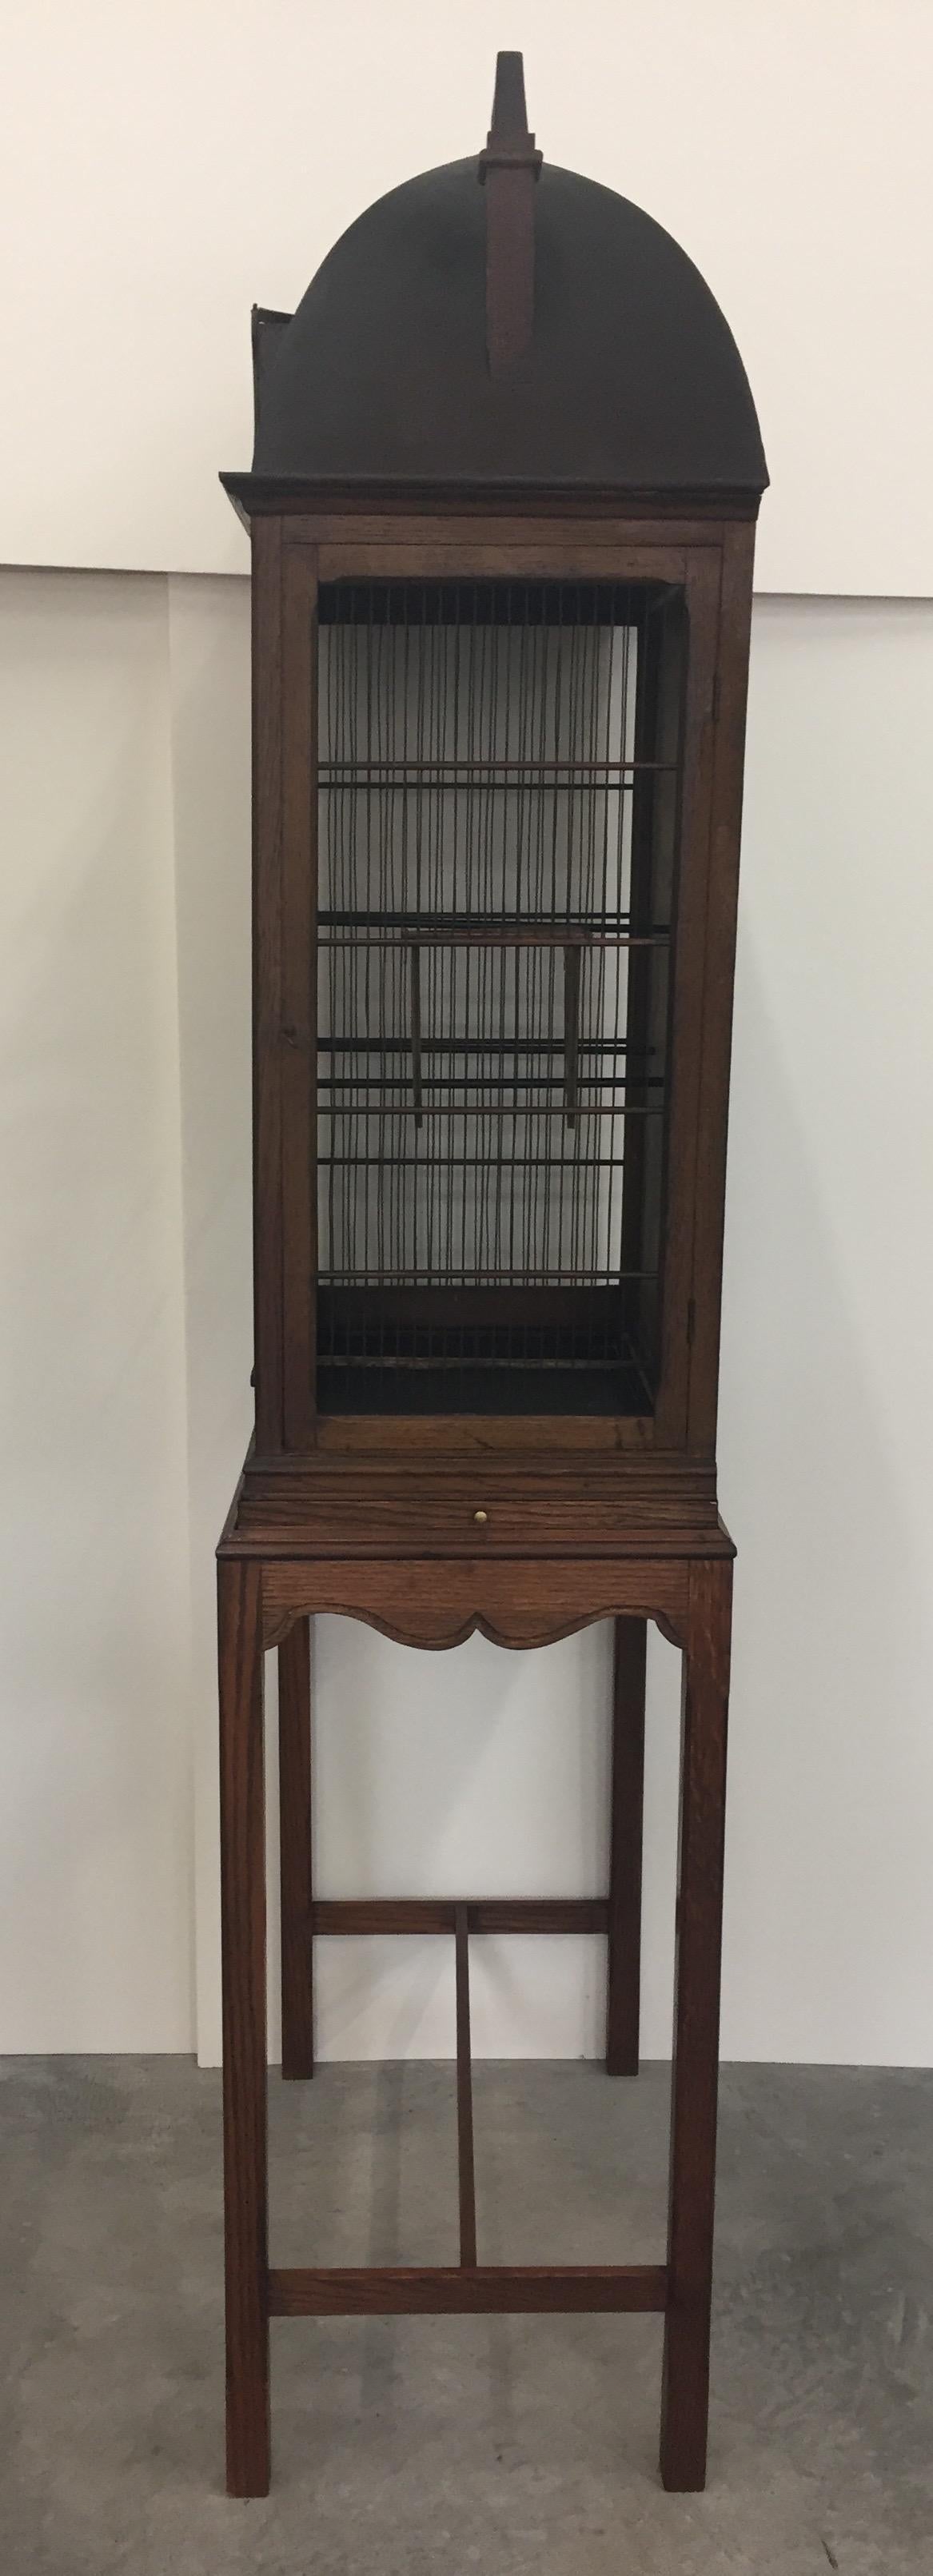 A stunning sculptural large birdcage having an intricately detailed roof, hand painted backdrop, mahogany stand with pull out platform, and working parts to house some lucky chirpers. 

